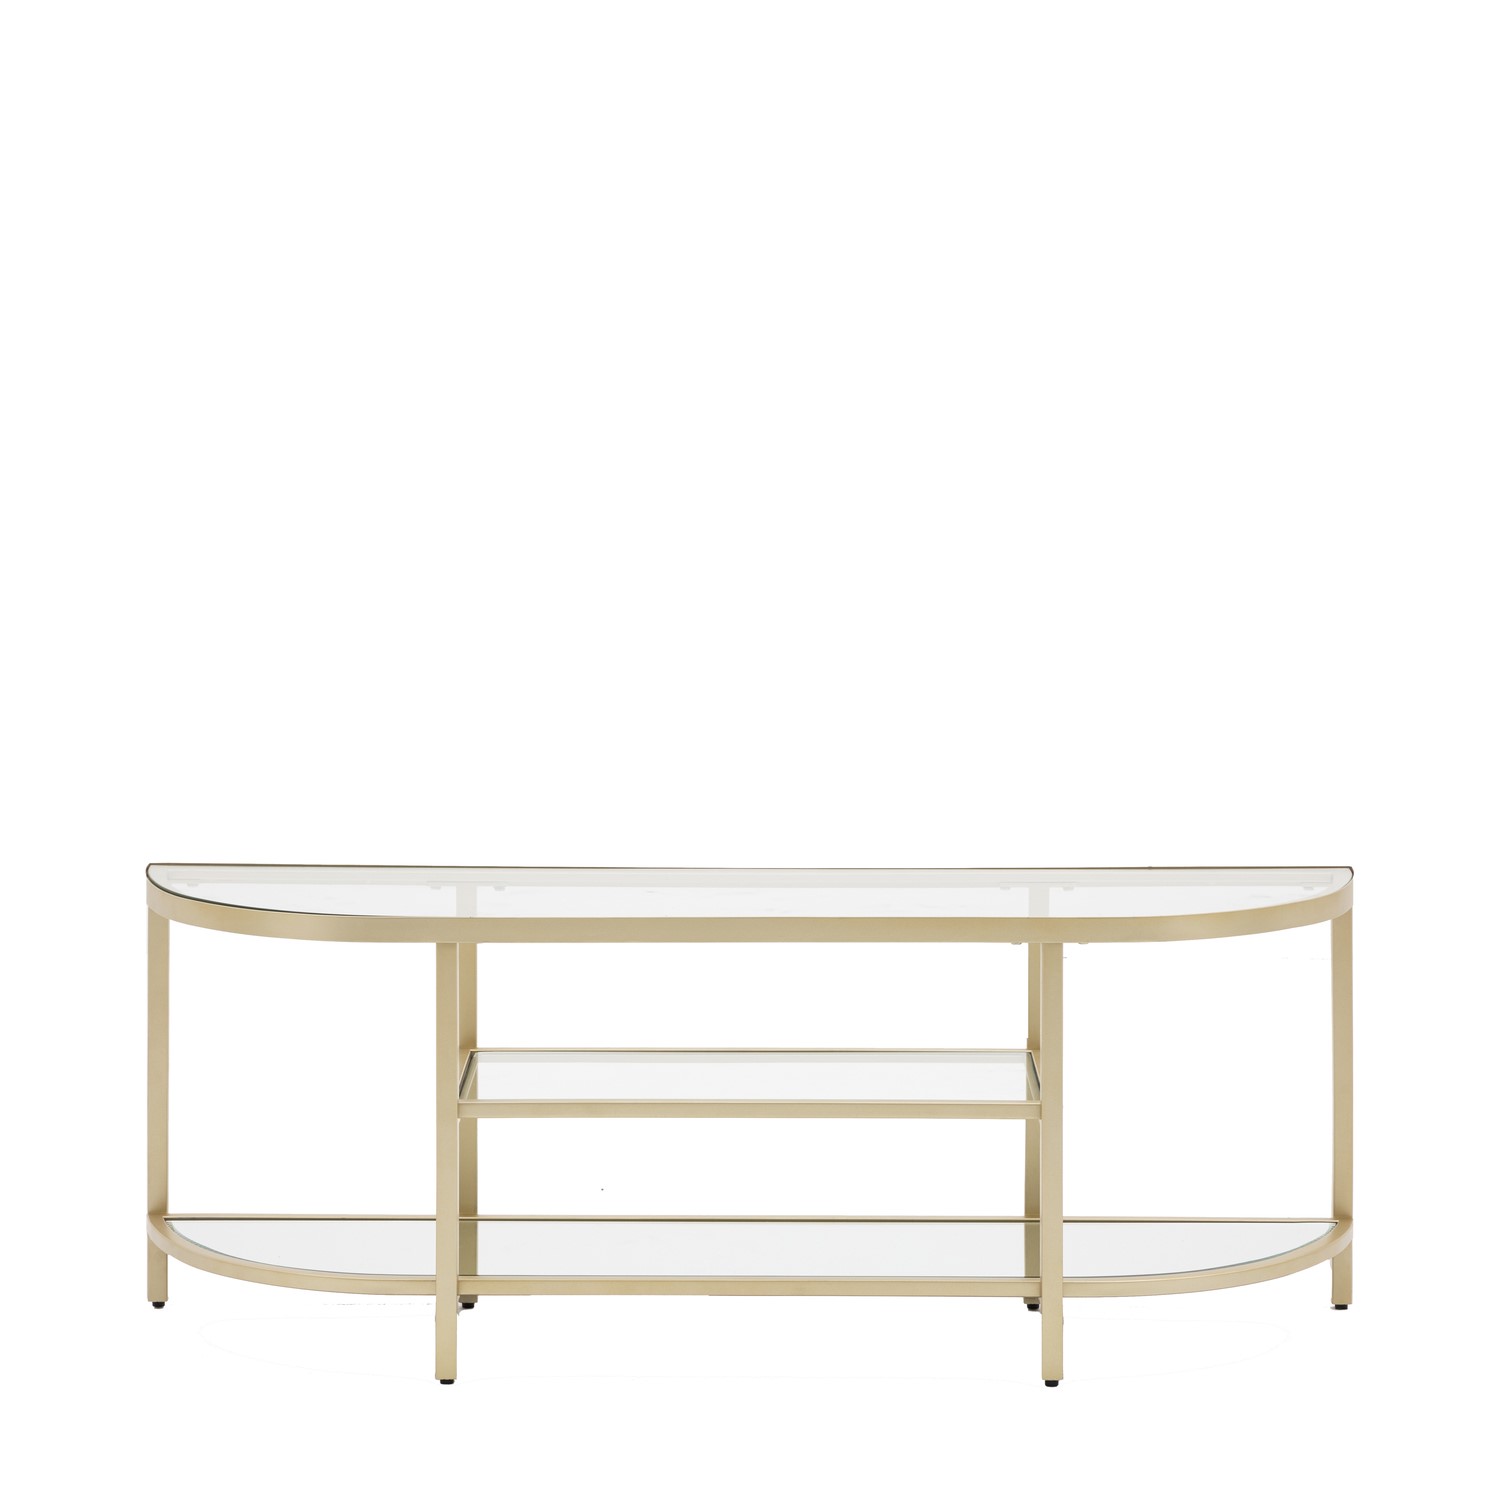 Photo of Hudson glass tv stand in champagne - caspian house